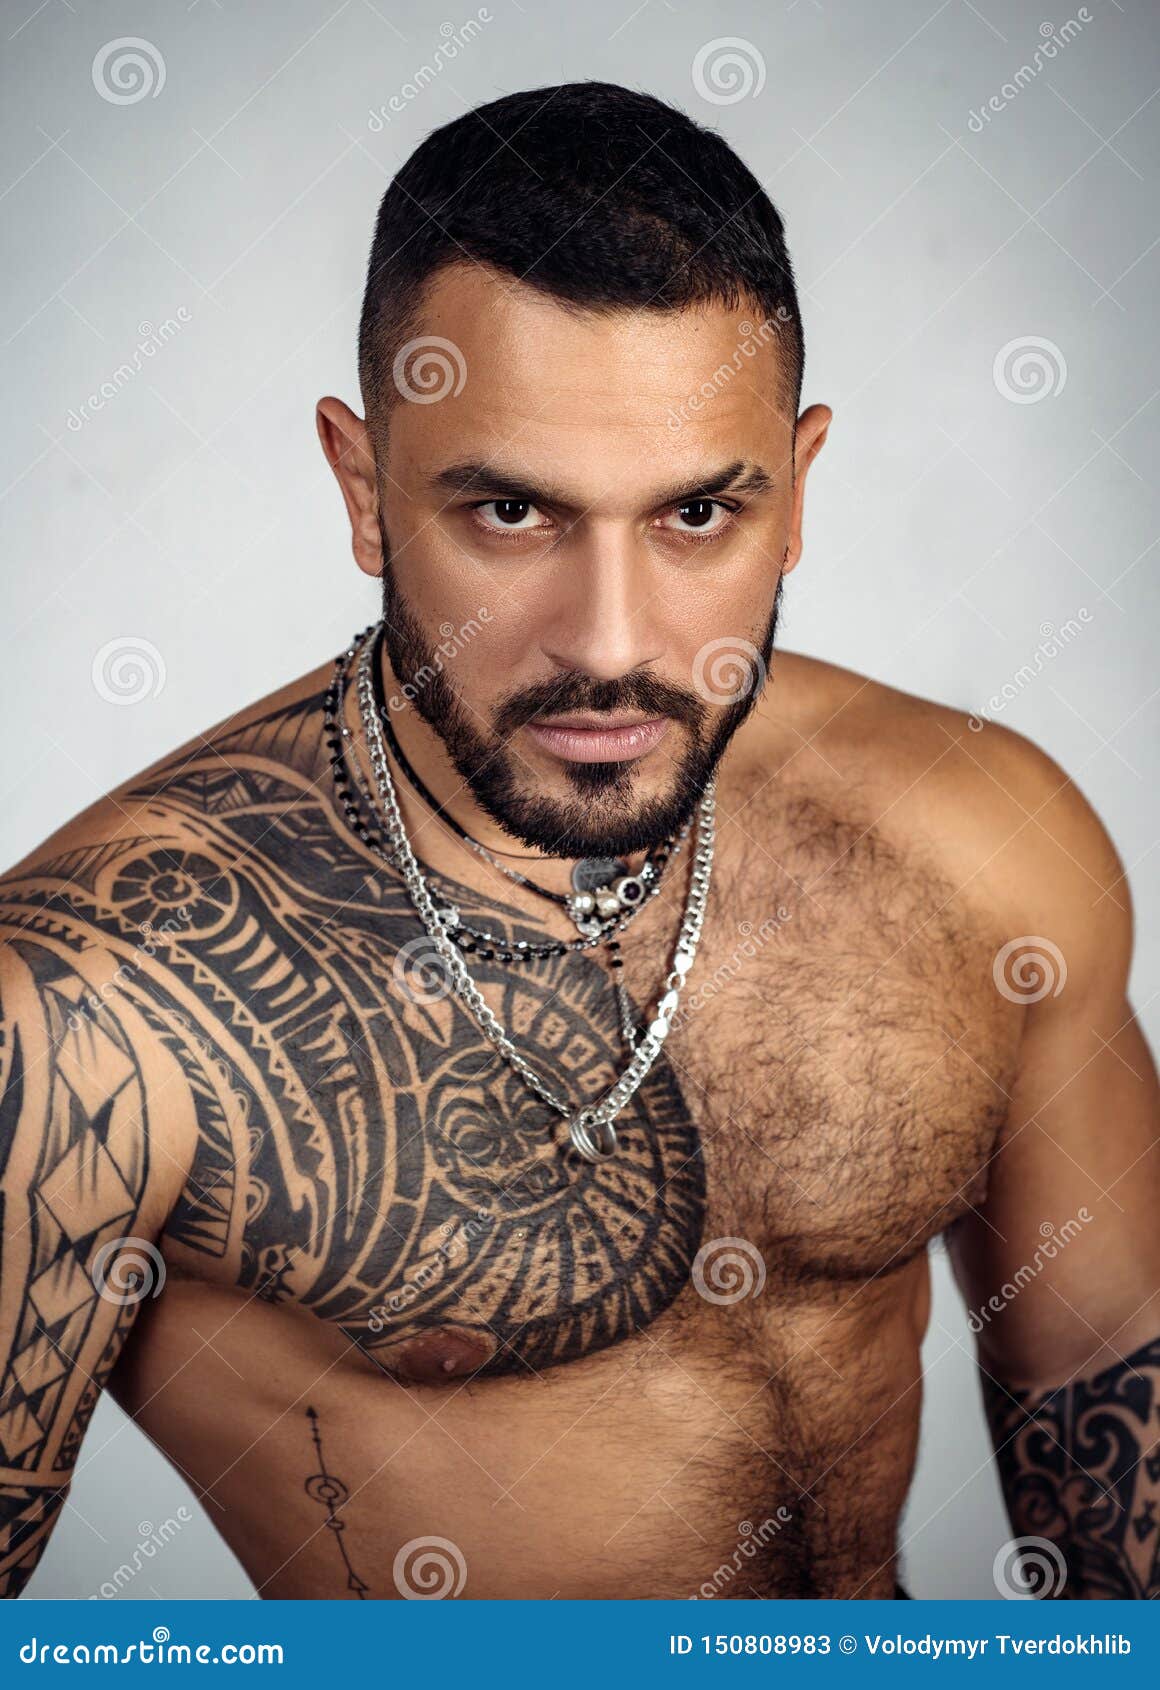 18,636 Chest Tattoos Men Royalty-Free Photos and Stock Images | Shutterstock